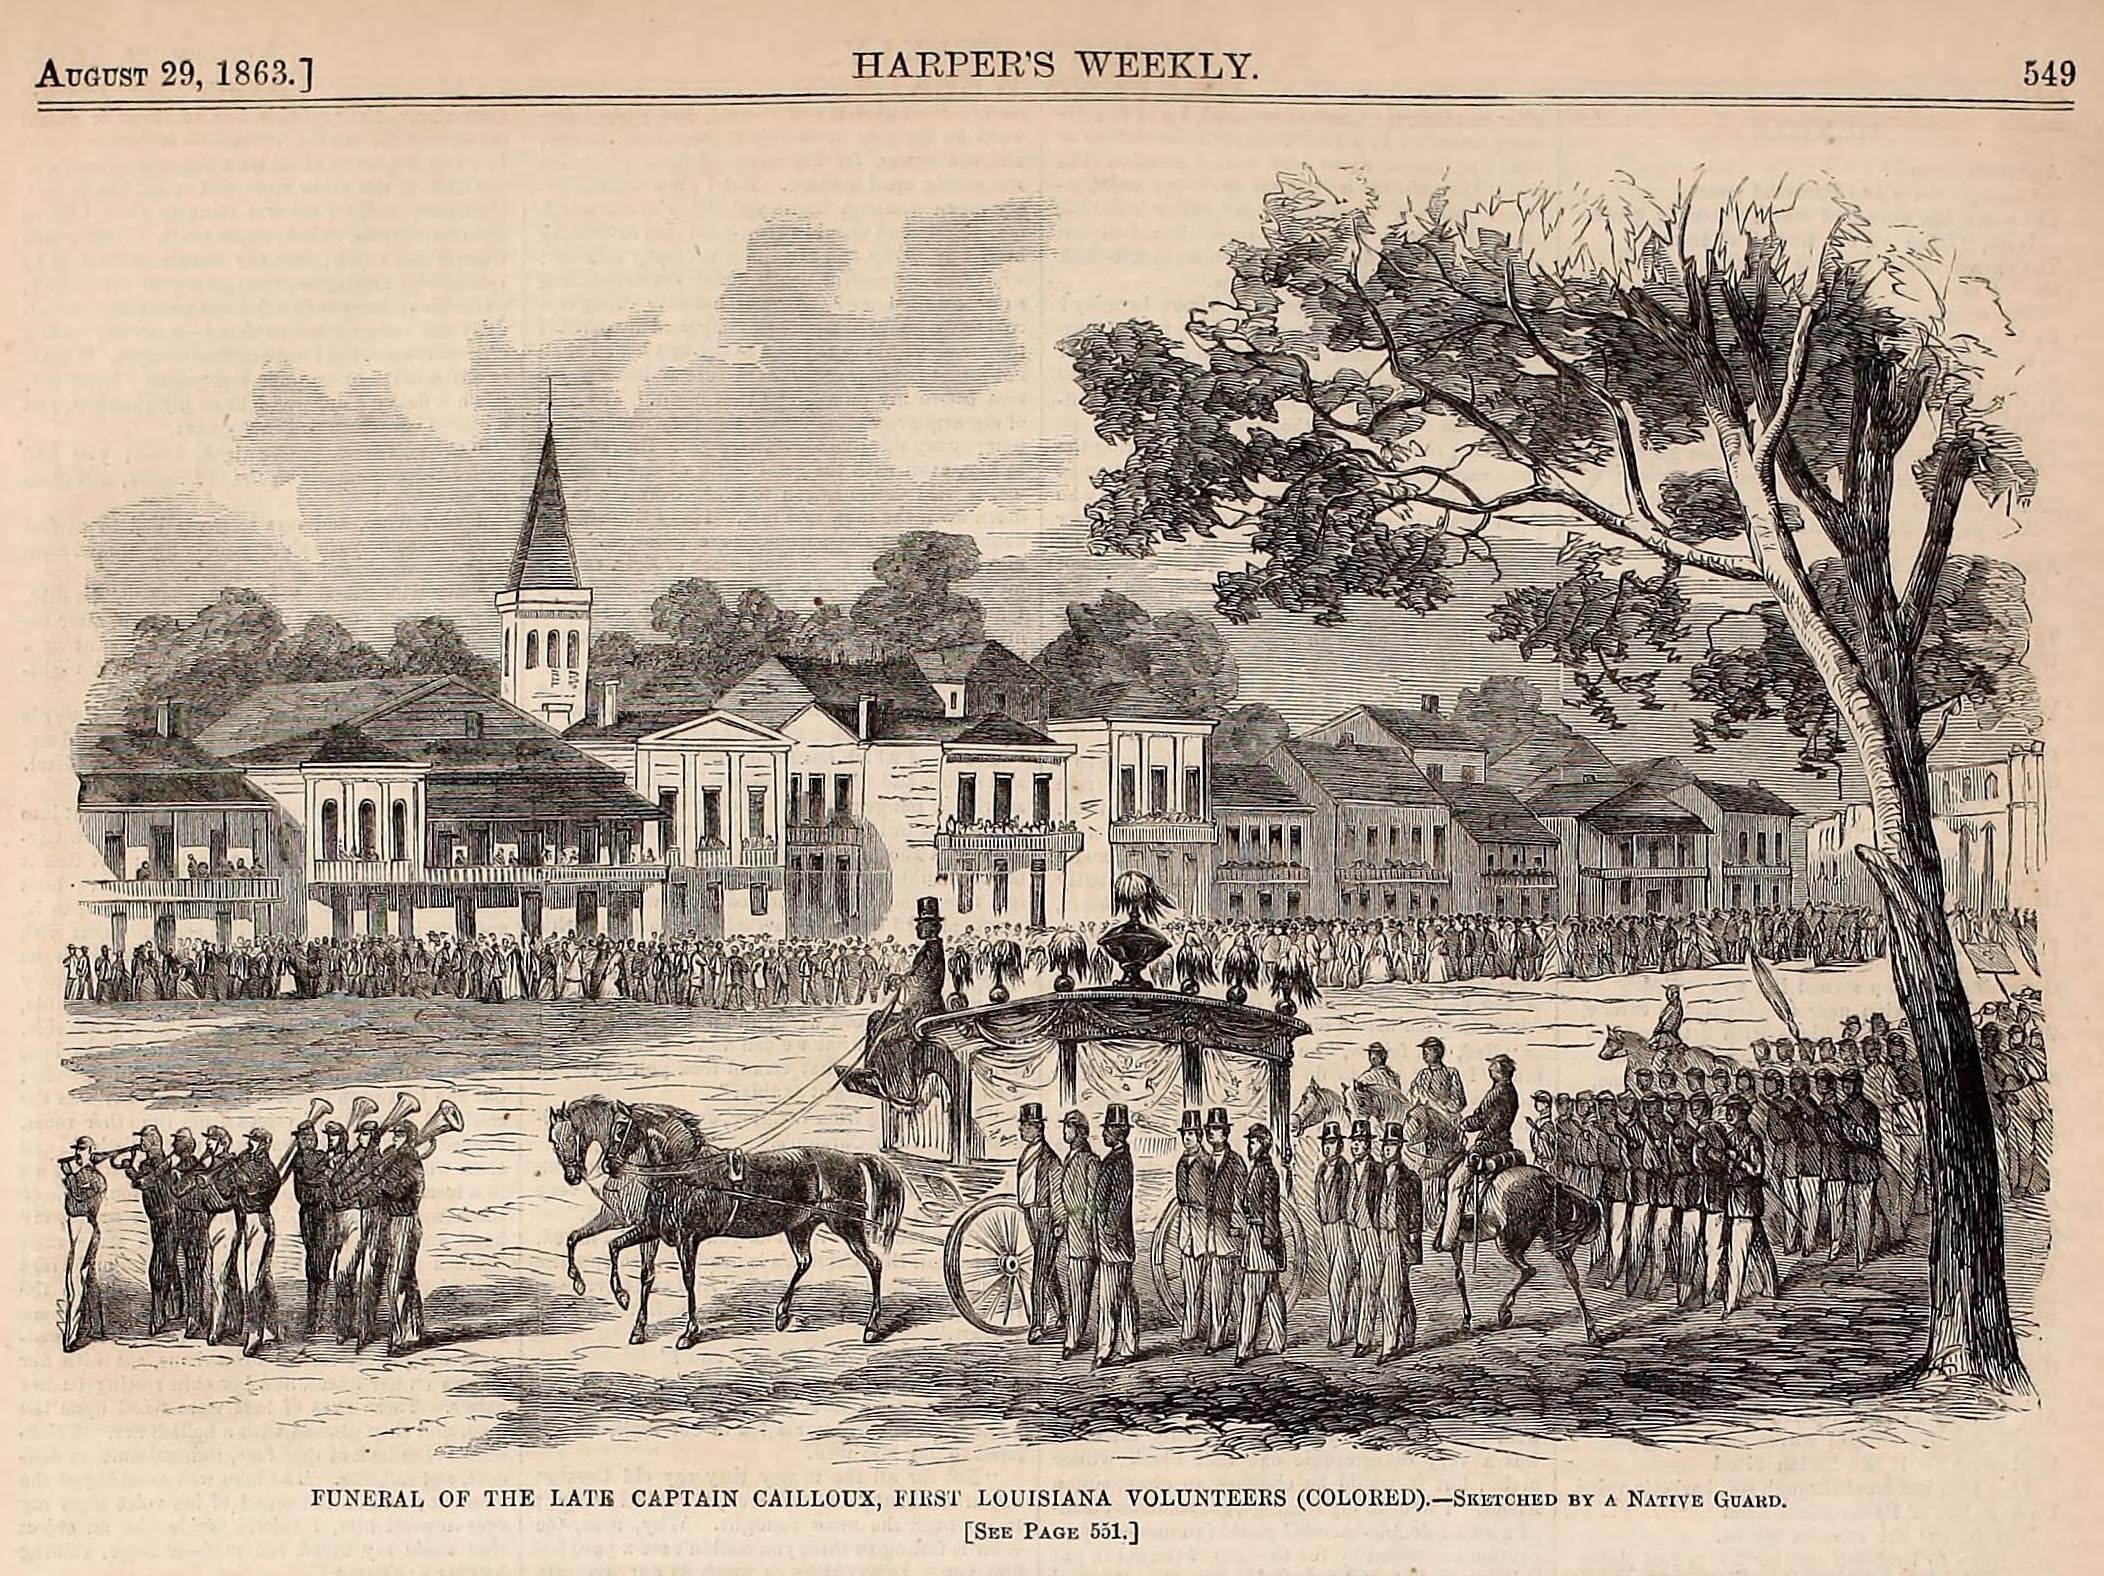 The funeral procession of Captain Andre Cailloux on July 29, 1863 in New Orleans is seen in this sketch by a Louisiana Native Guard soldier published in Harpers Weekly August 29, 1863. The funeral for the black Civil War hero killed at Port Hudson, Louisiana was the largest procession New Orleans had seen and included 37 mural aid societies including a group of free people of color called the Societe dEconomie or Society of Economy that met at Economy Hall. The horse-drawn hearse was provided by Economy Halls president and another member was a pallbearer for Cailloux. The 42nd Massachusetts, a white Union regiment that served at Port Hudson and New Orleans under Major General Banks, played valved brass instruments that were invented a few decades earlier in the 1800s.  The Union army controlled New Orleans after the Confederates abandoned the city without a fight in May 1862.